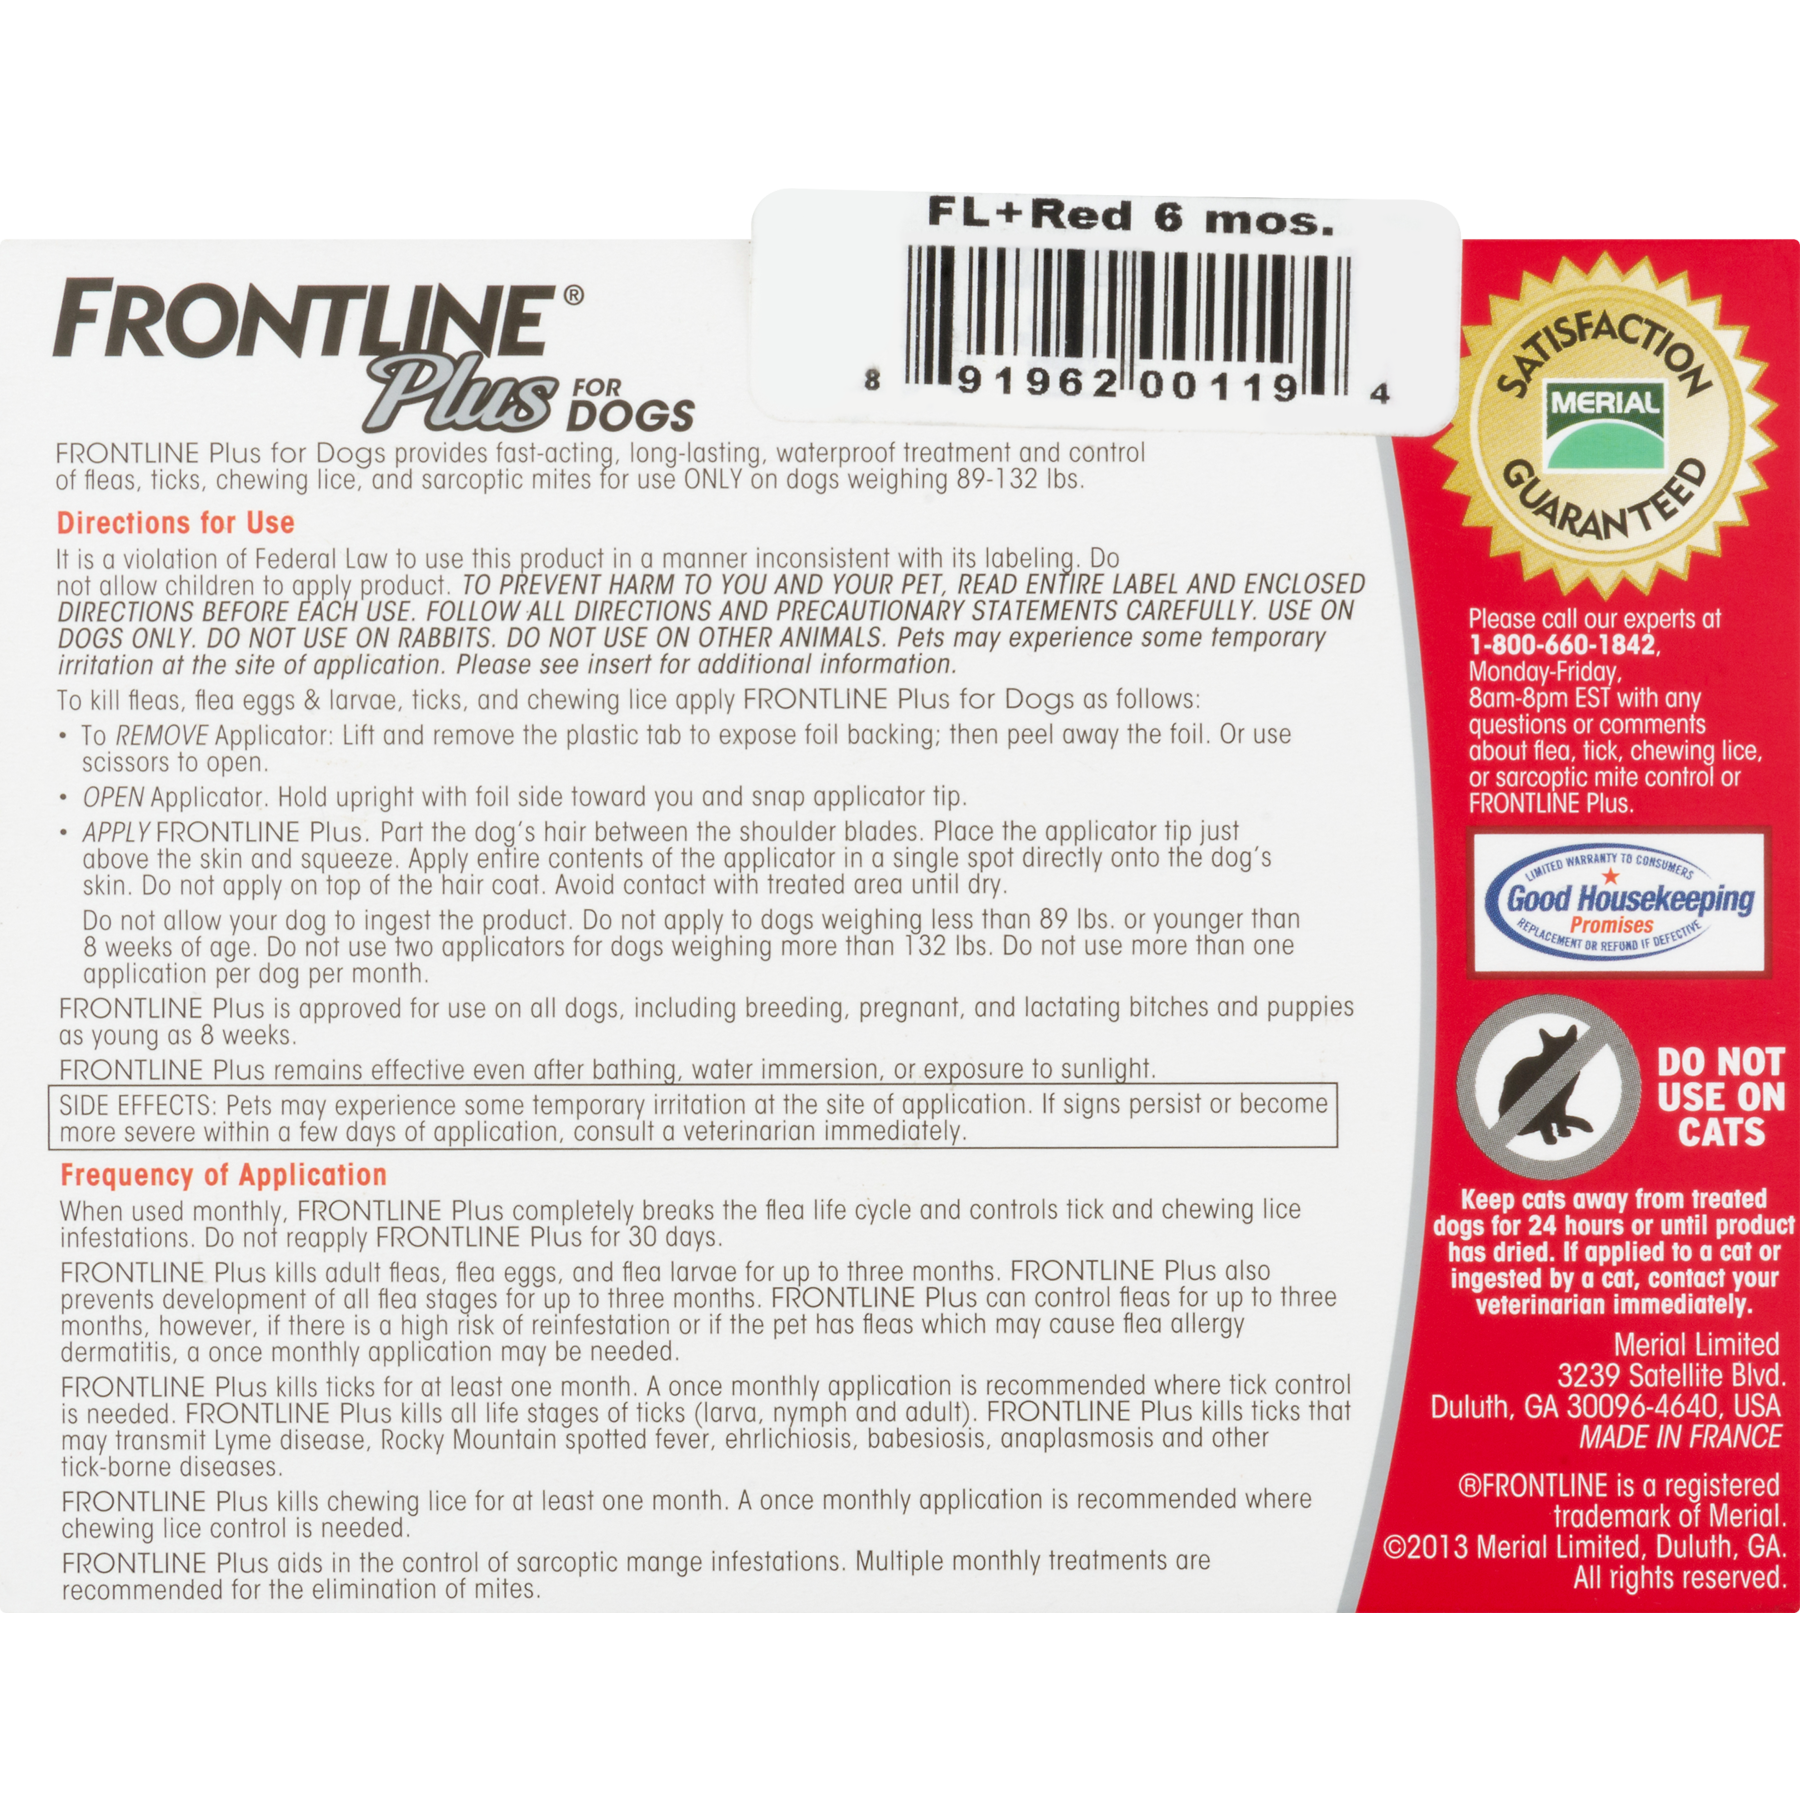 FRONTLINE Plu Flea and Tick Treatment, Extra Large Dogs 89-132 Lbs, 6 Doses